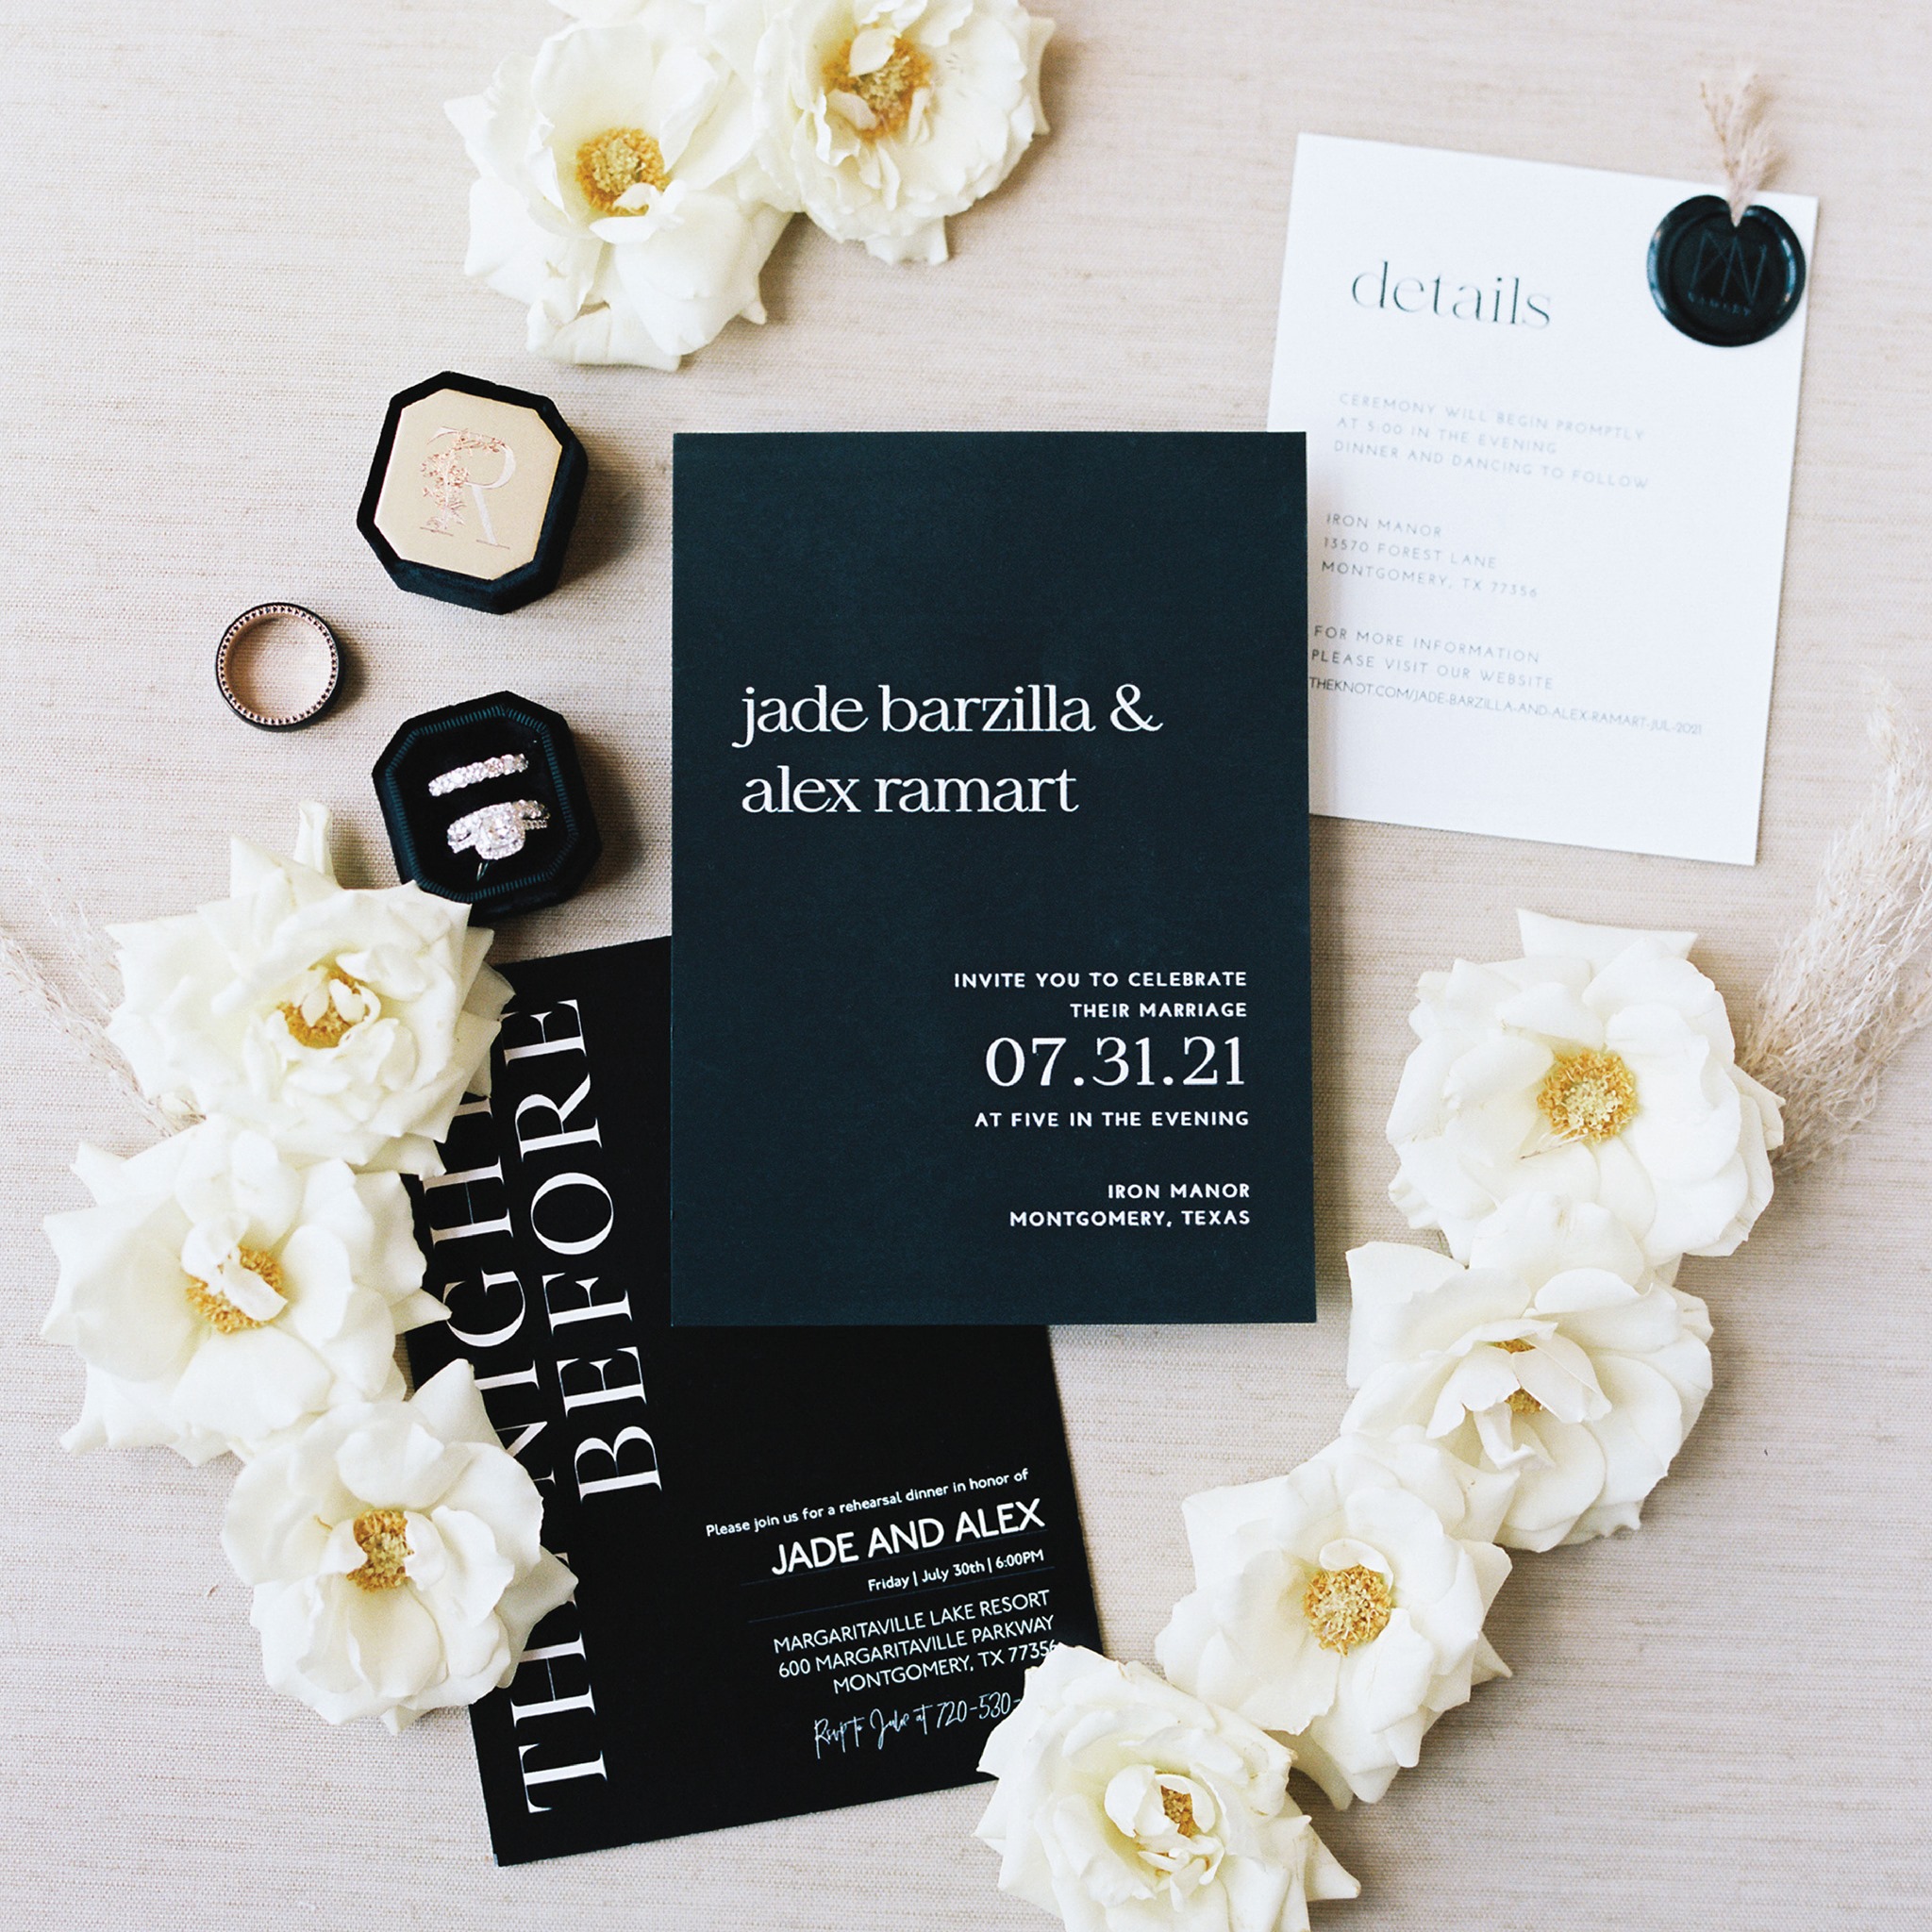 A black, navy and cream invitation suite for a wedding surrounded by fresh roses and a velvet box with an engagement ring.